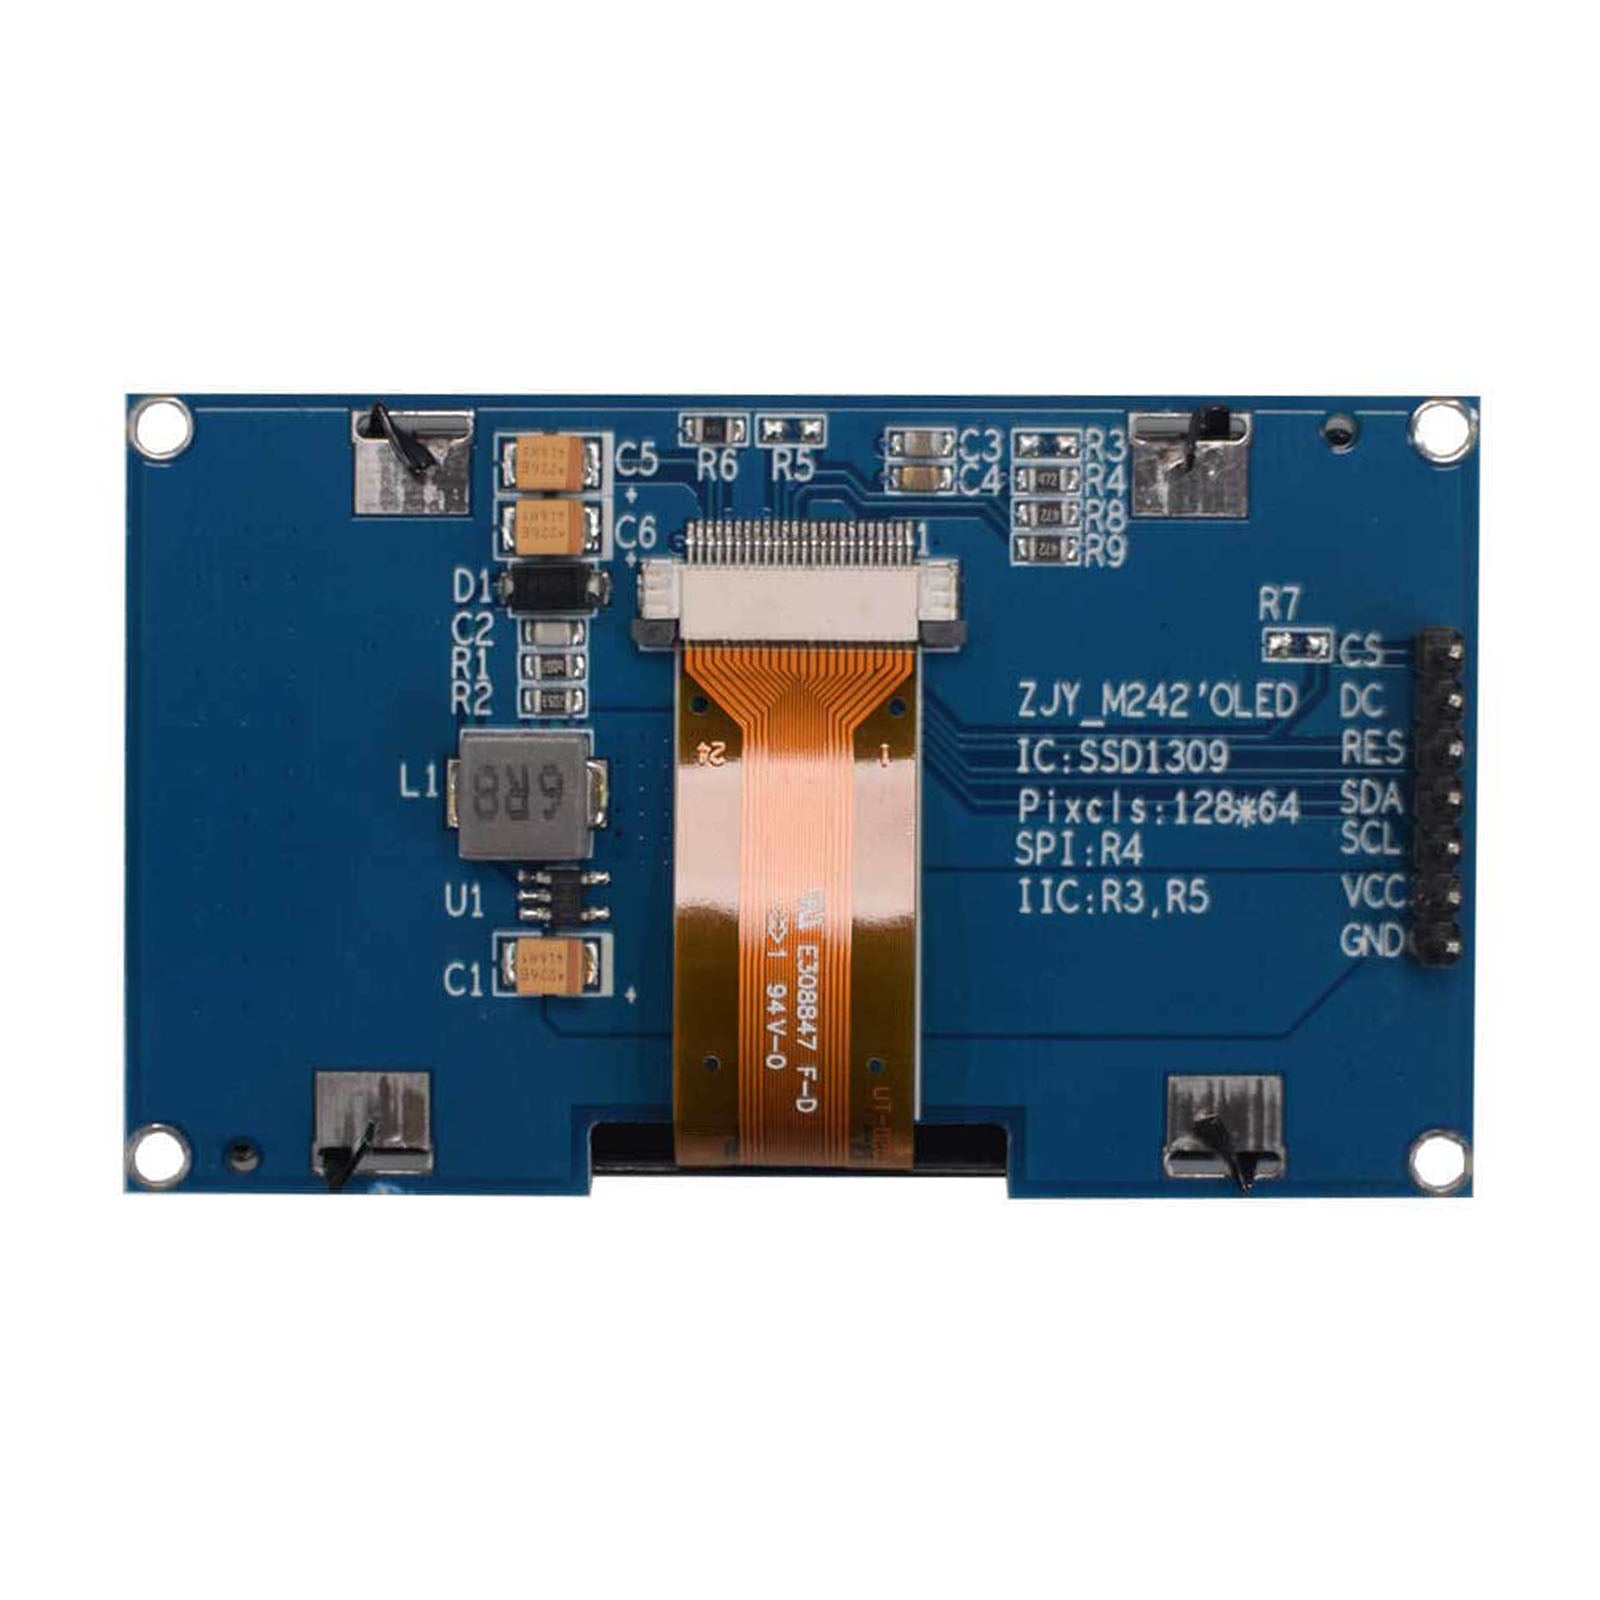 2.42 inch Monochrome OLED Graphic Display Module with 128x64 resolution, utilizing SPI interface